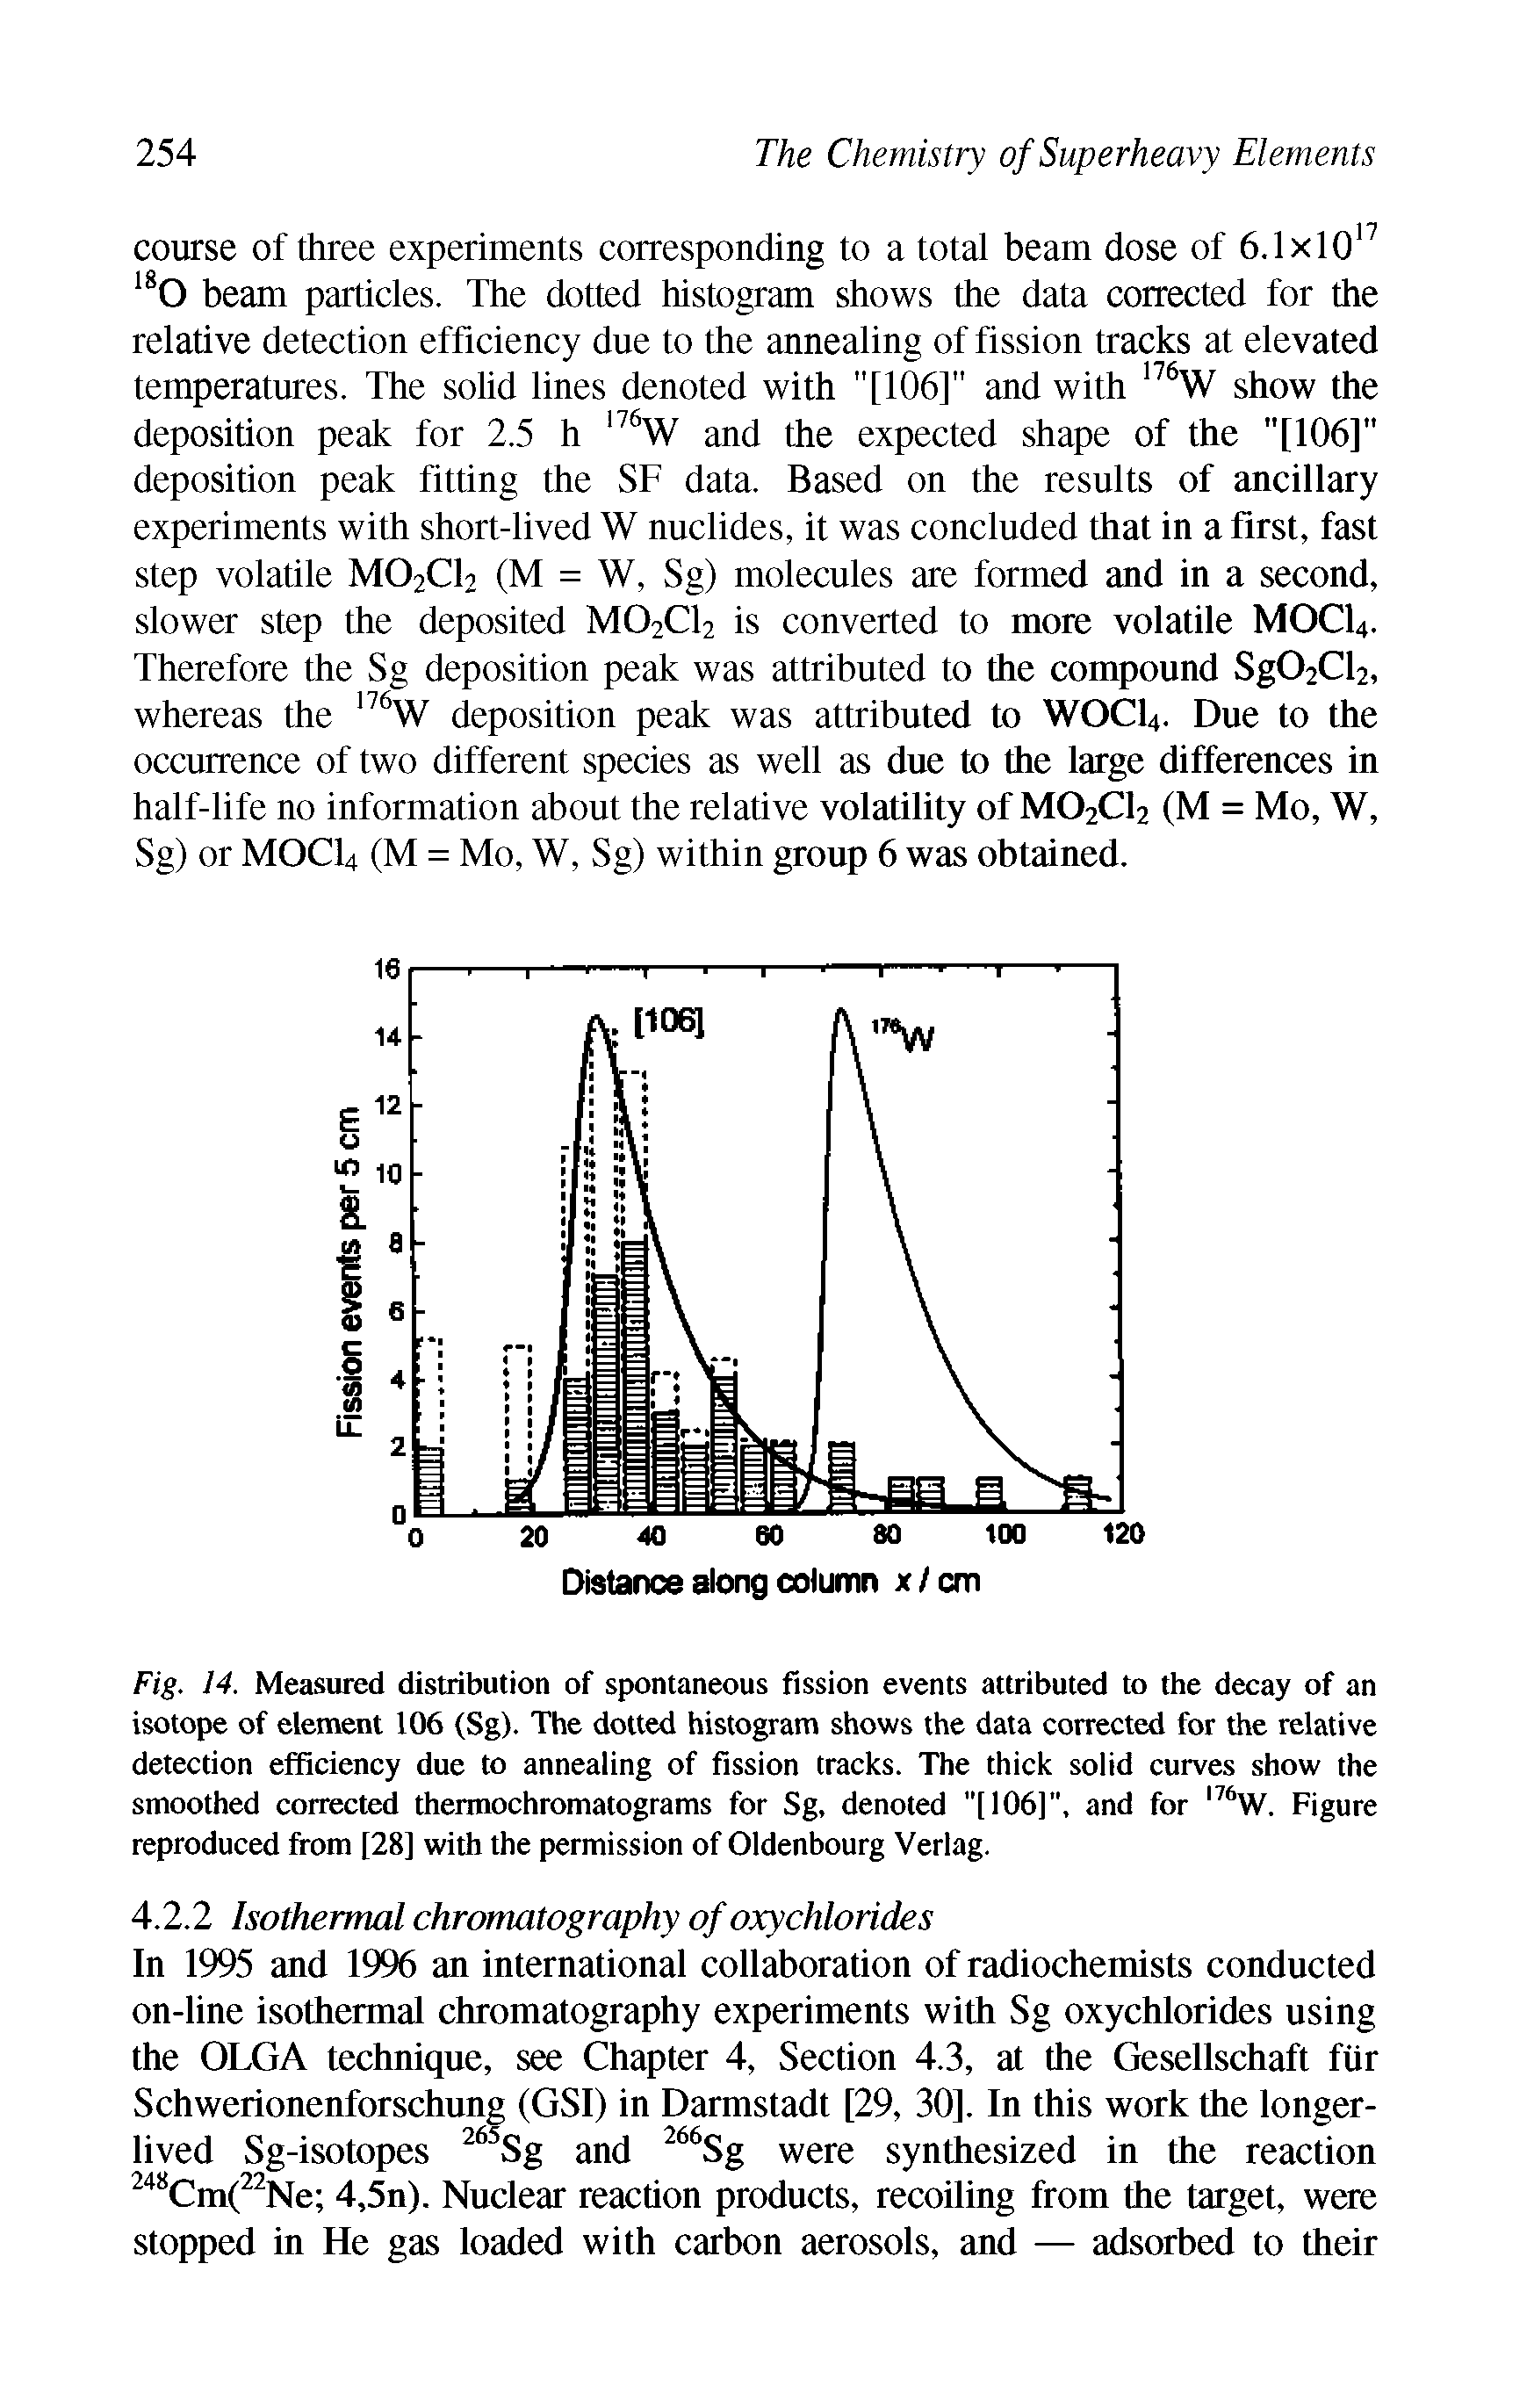 Fig. 14. Measured distribution of spontaneous fission events attributed to the decay of an isotope of element 106 (Sg). The dotted histogram shows the data corrected for the relative detection efficiency due to annealing of fission tracks. The thick solid curves show the smoothed corrected thermochromatograms for Sg, denoted "[106] , and for l76W. Figure reproduced from [28] with the permission of Oldenbourg Verlag.